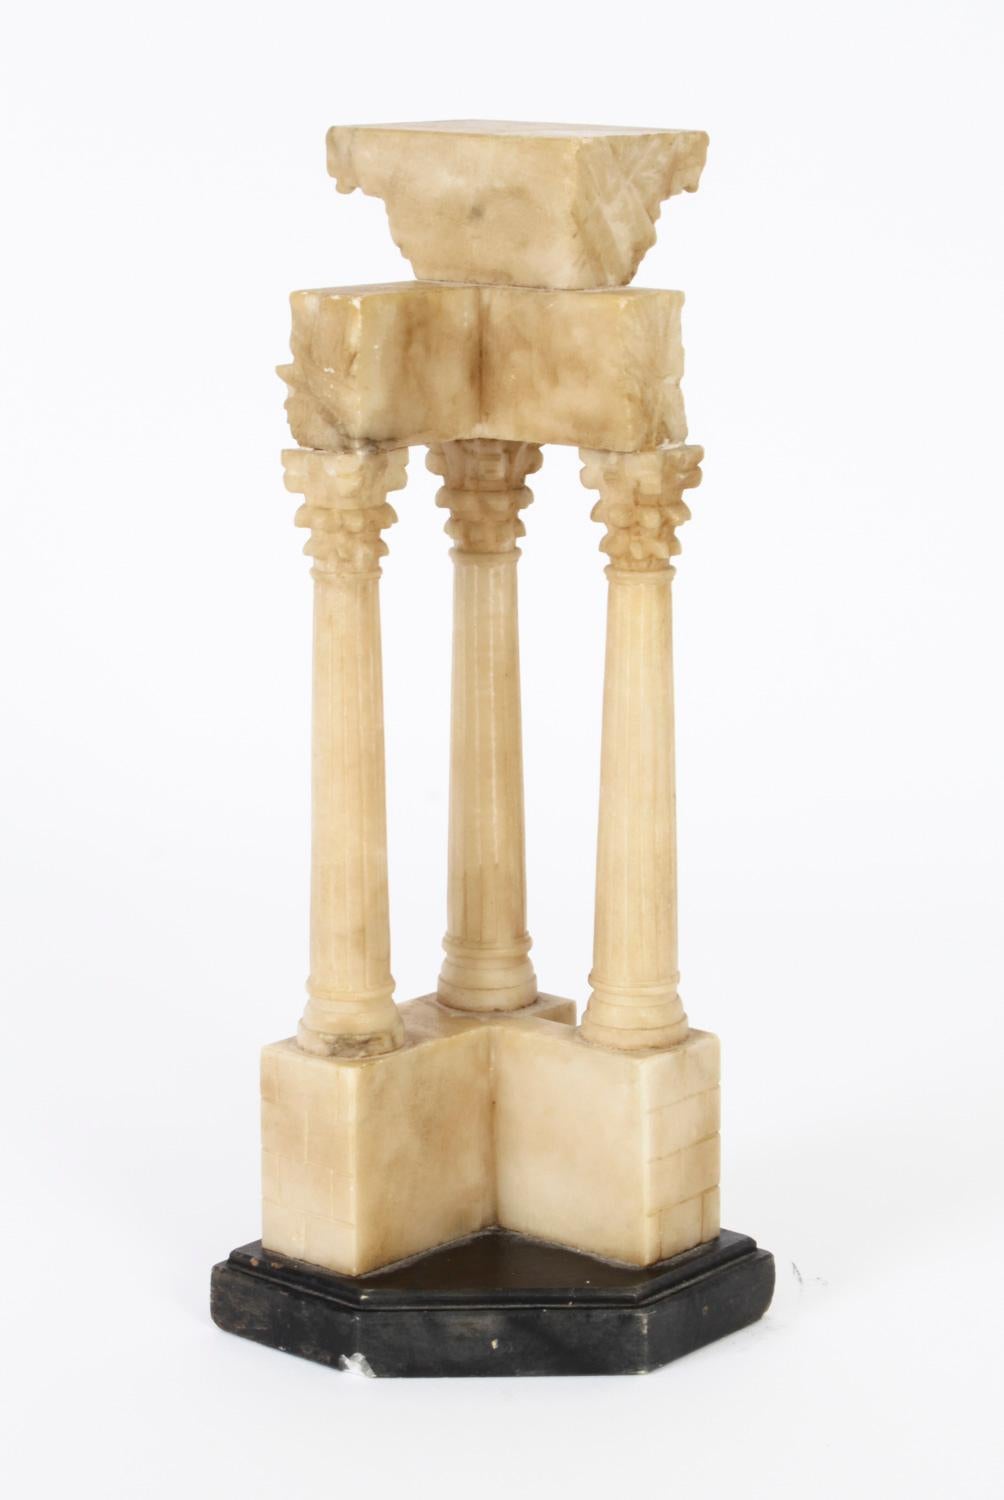 A grand tour model of the Temple of Vespasian, 

A lovely Grand Tour simulated marble model of the Temple of Vespasian and Titus, mid 20th century in date.

The beautifully realistic model features the three remaining corner Corinthian columns